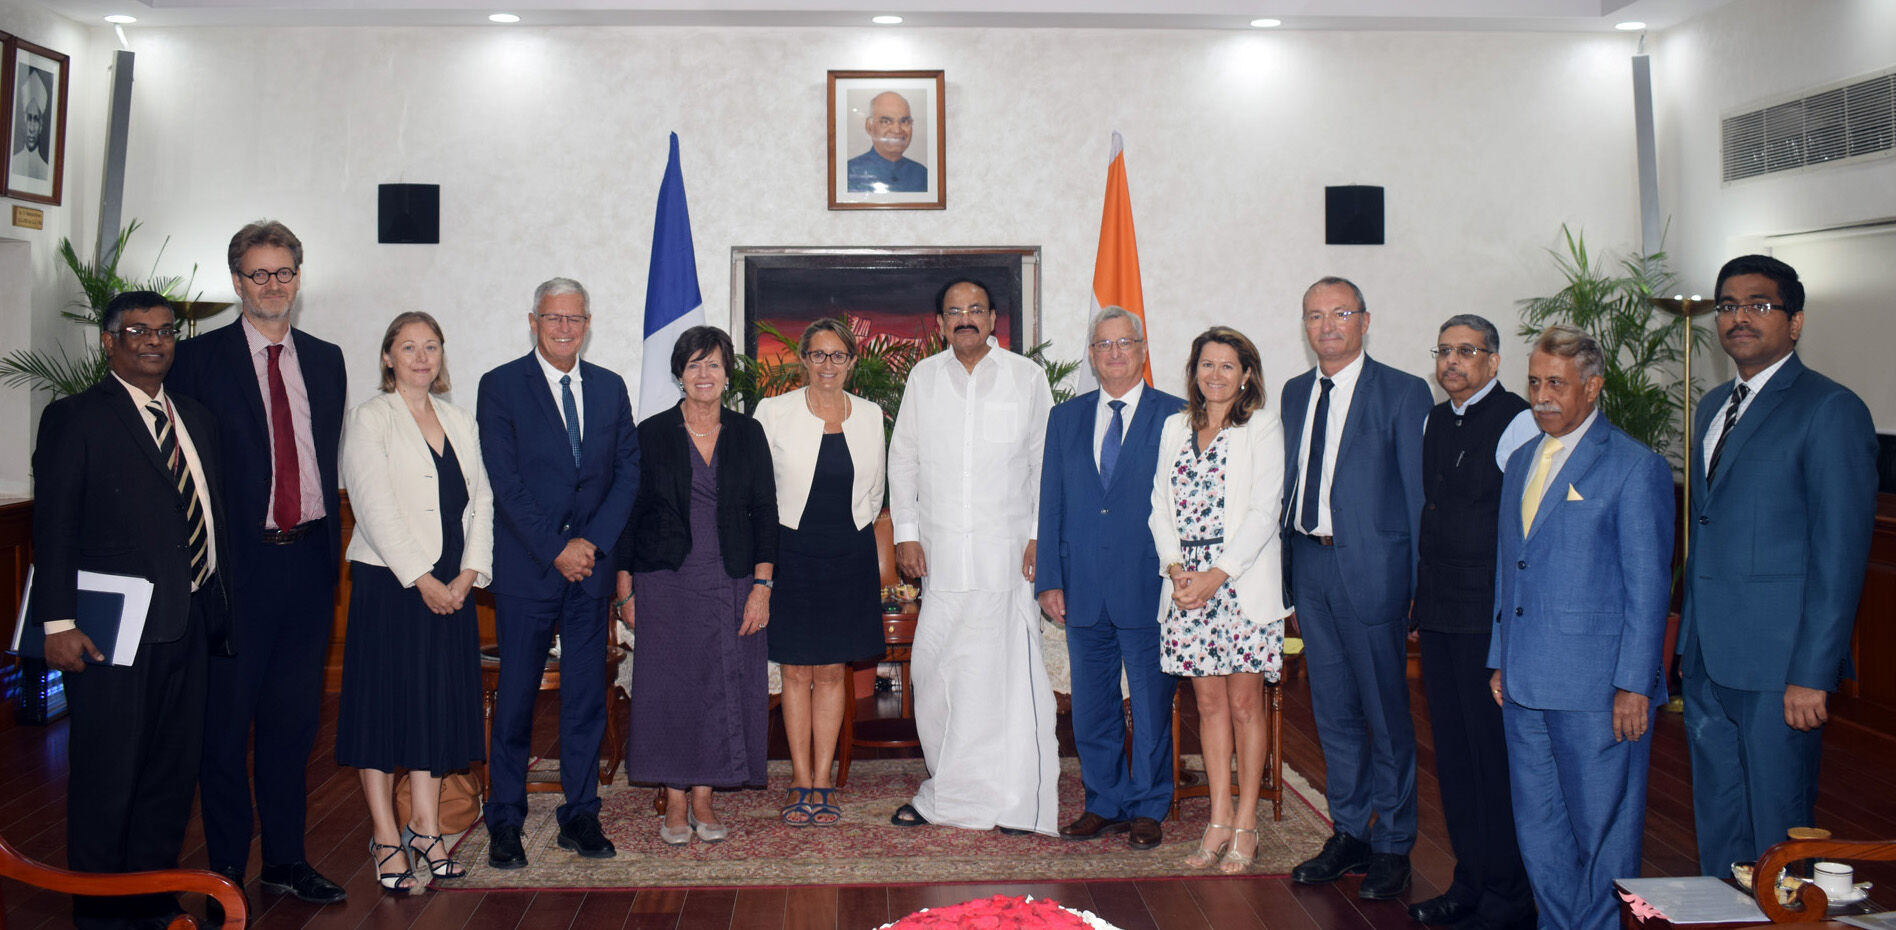 The Vice President,  M. Venkaiah Naidu with the delegation of French Parliamentarians led by the Chair, Senate Standing Committee for Economic Affairs, France, Sophie Primas, in New Delhi on September 09, 2019.